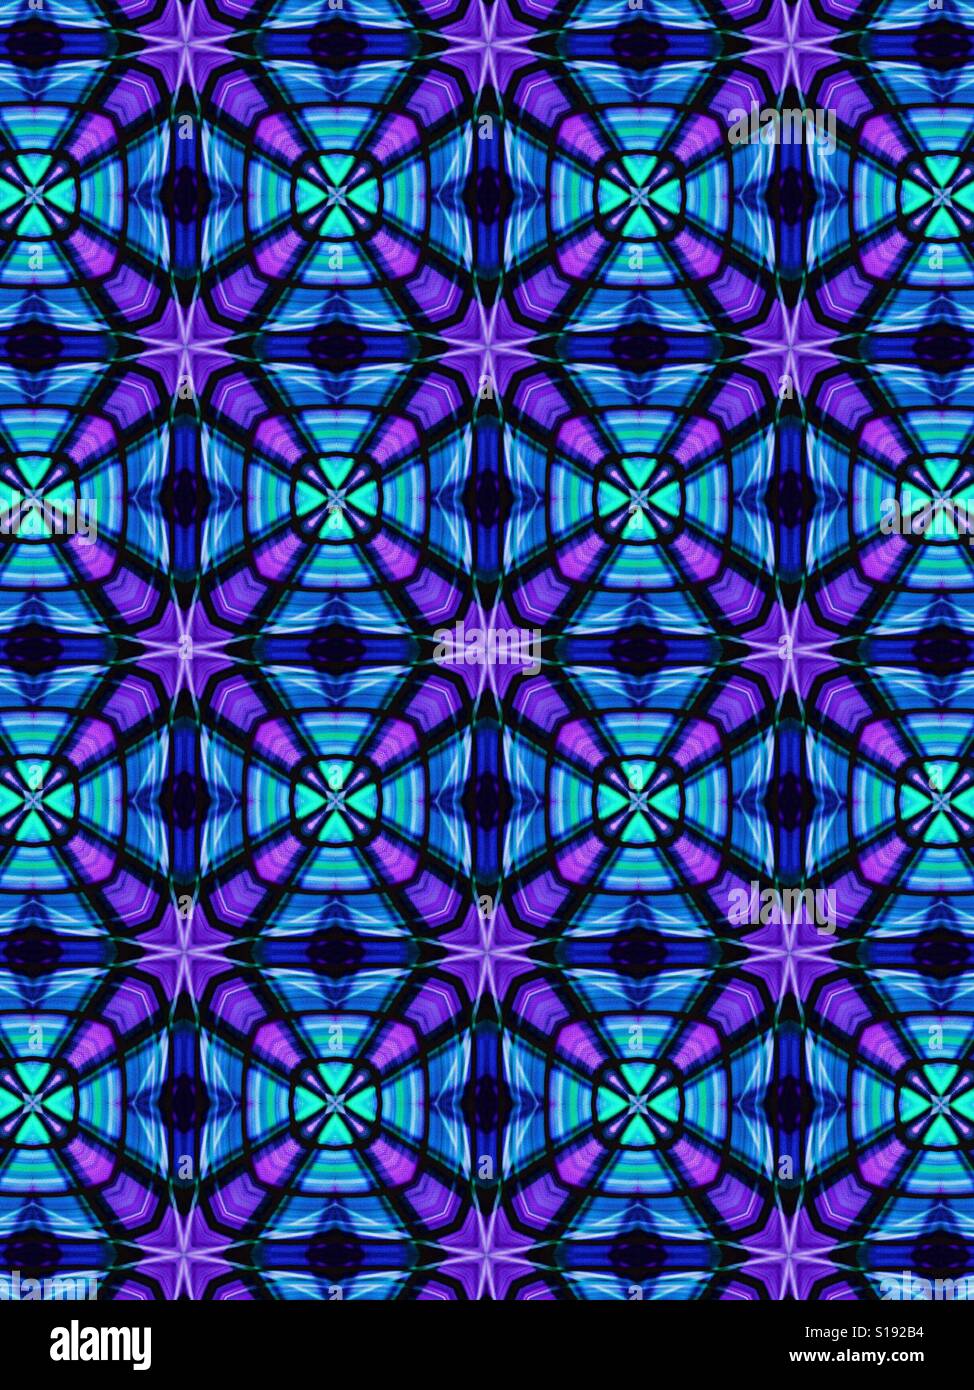 An abstract geometric pattern of purple stars against a blue background Stock Photo